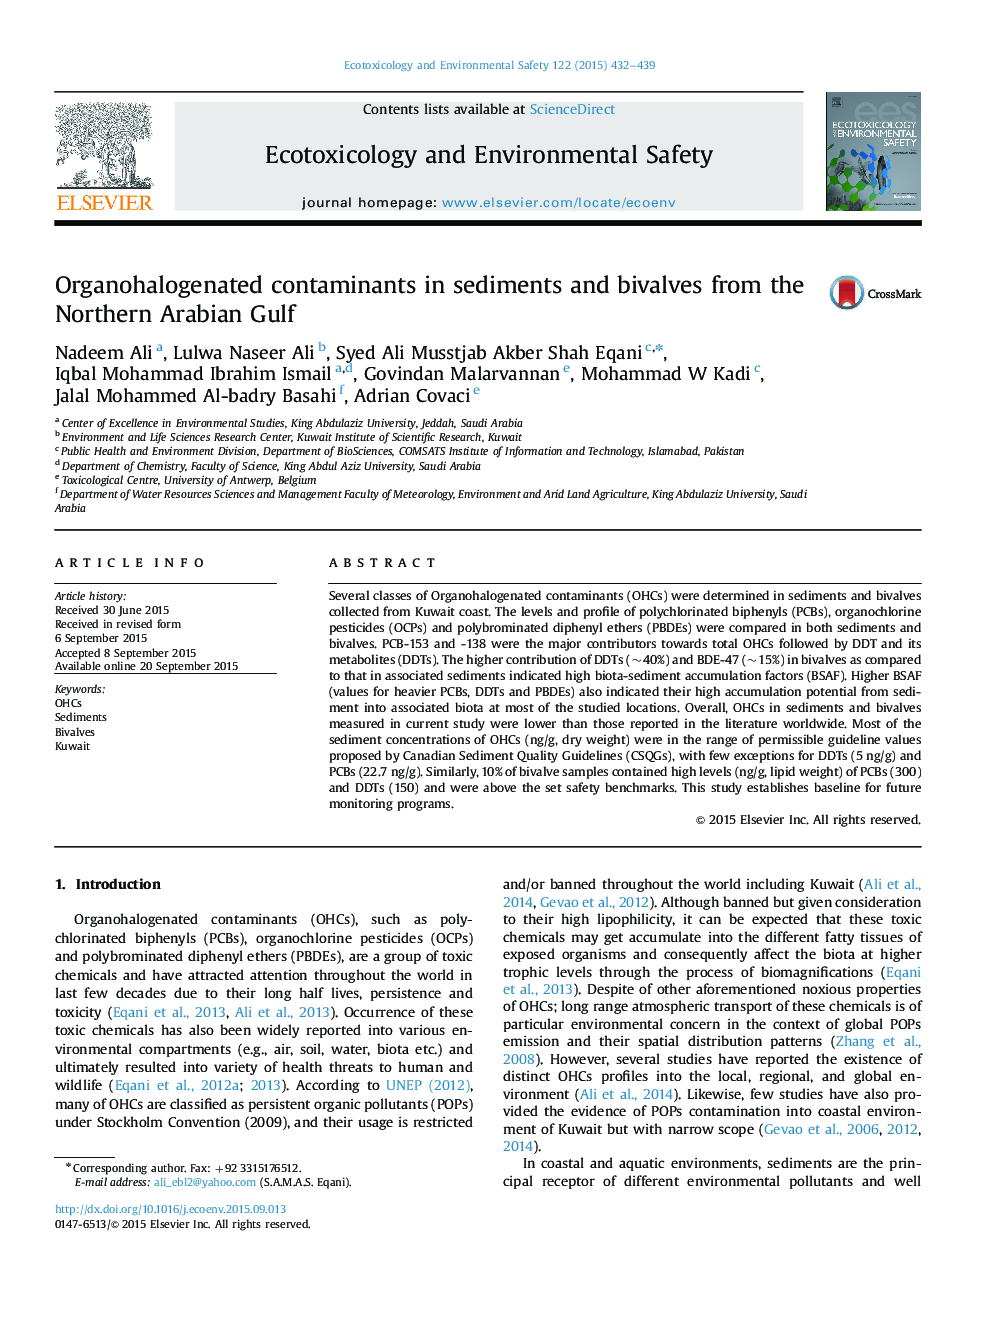 Organohalogenated contaminants in sediments and bivalves from the Northern Arabian Gulf